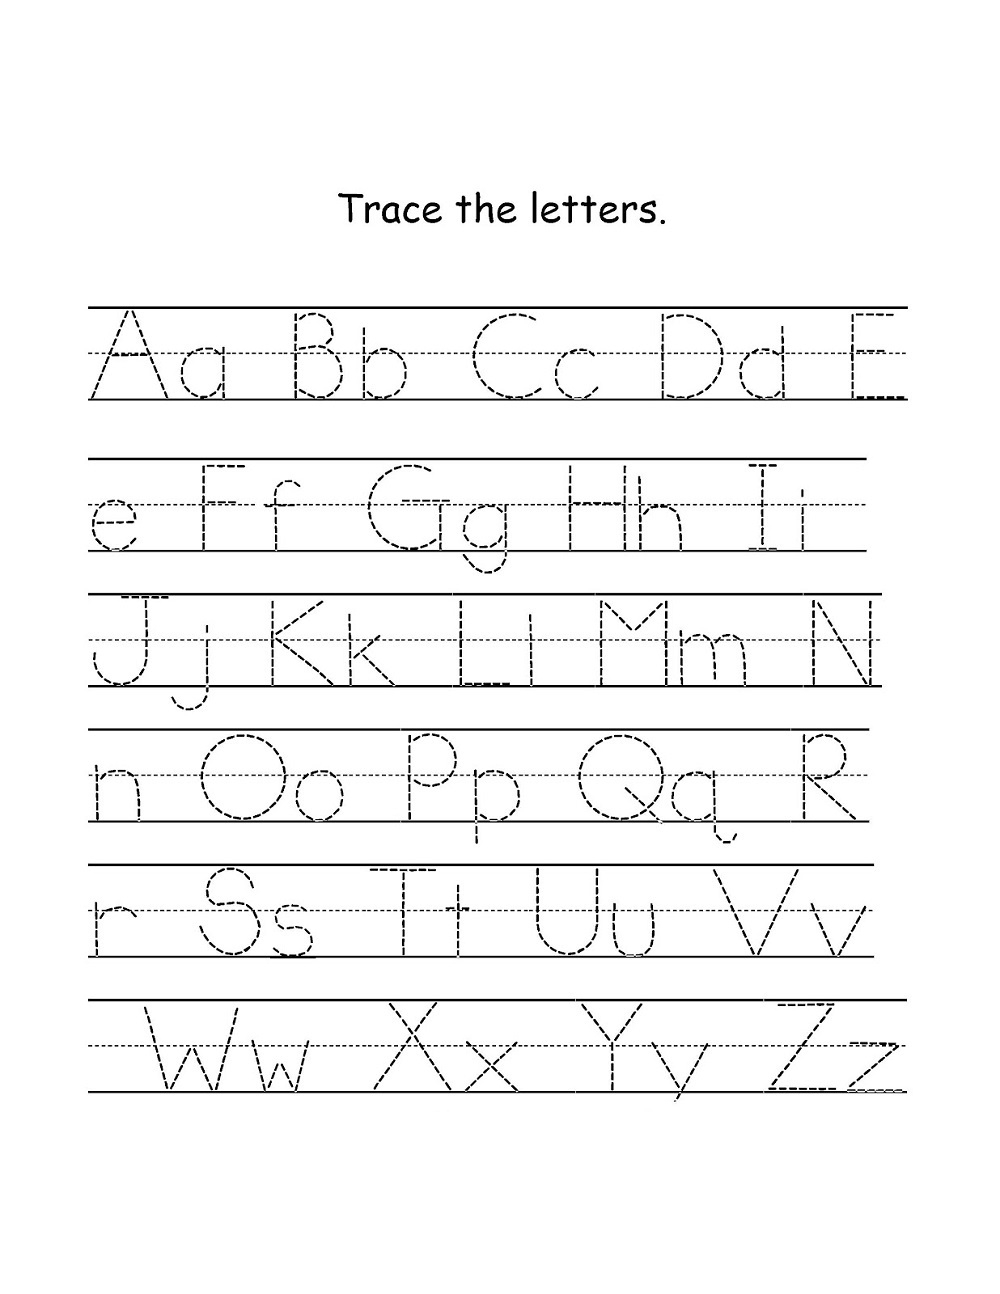 Alphabet Tracing For Kids A-Z | Activity Shelter for How To Make Tracing Letters